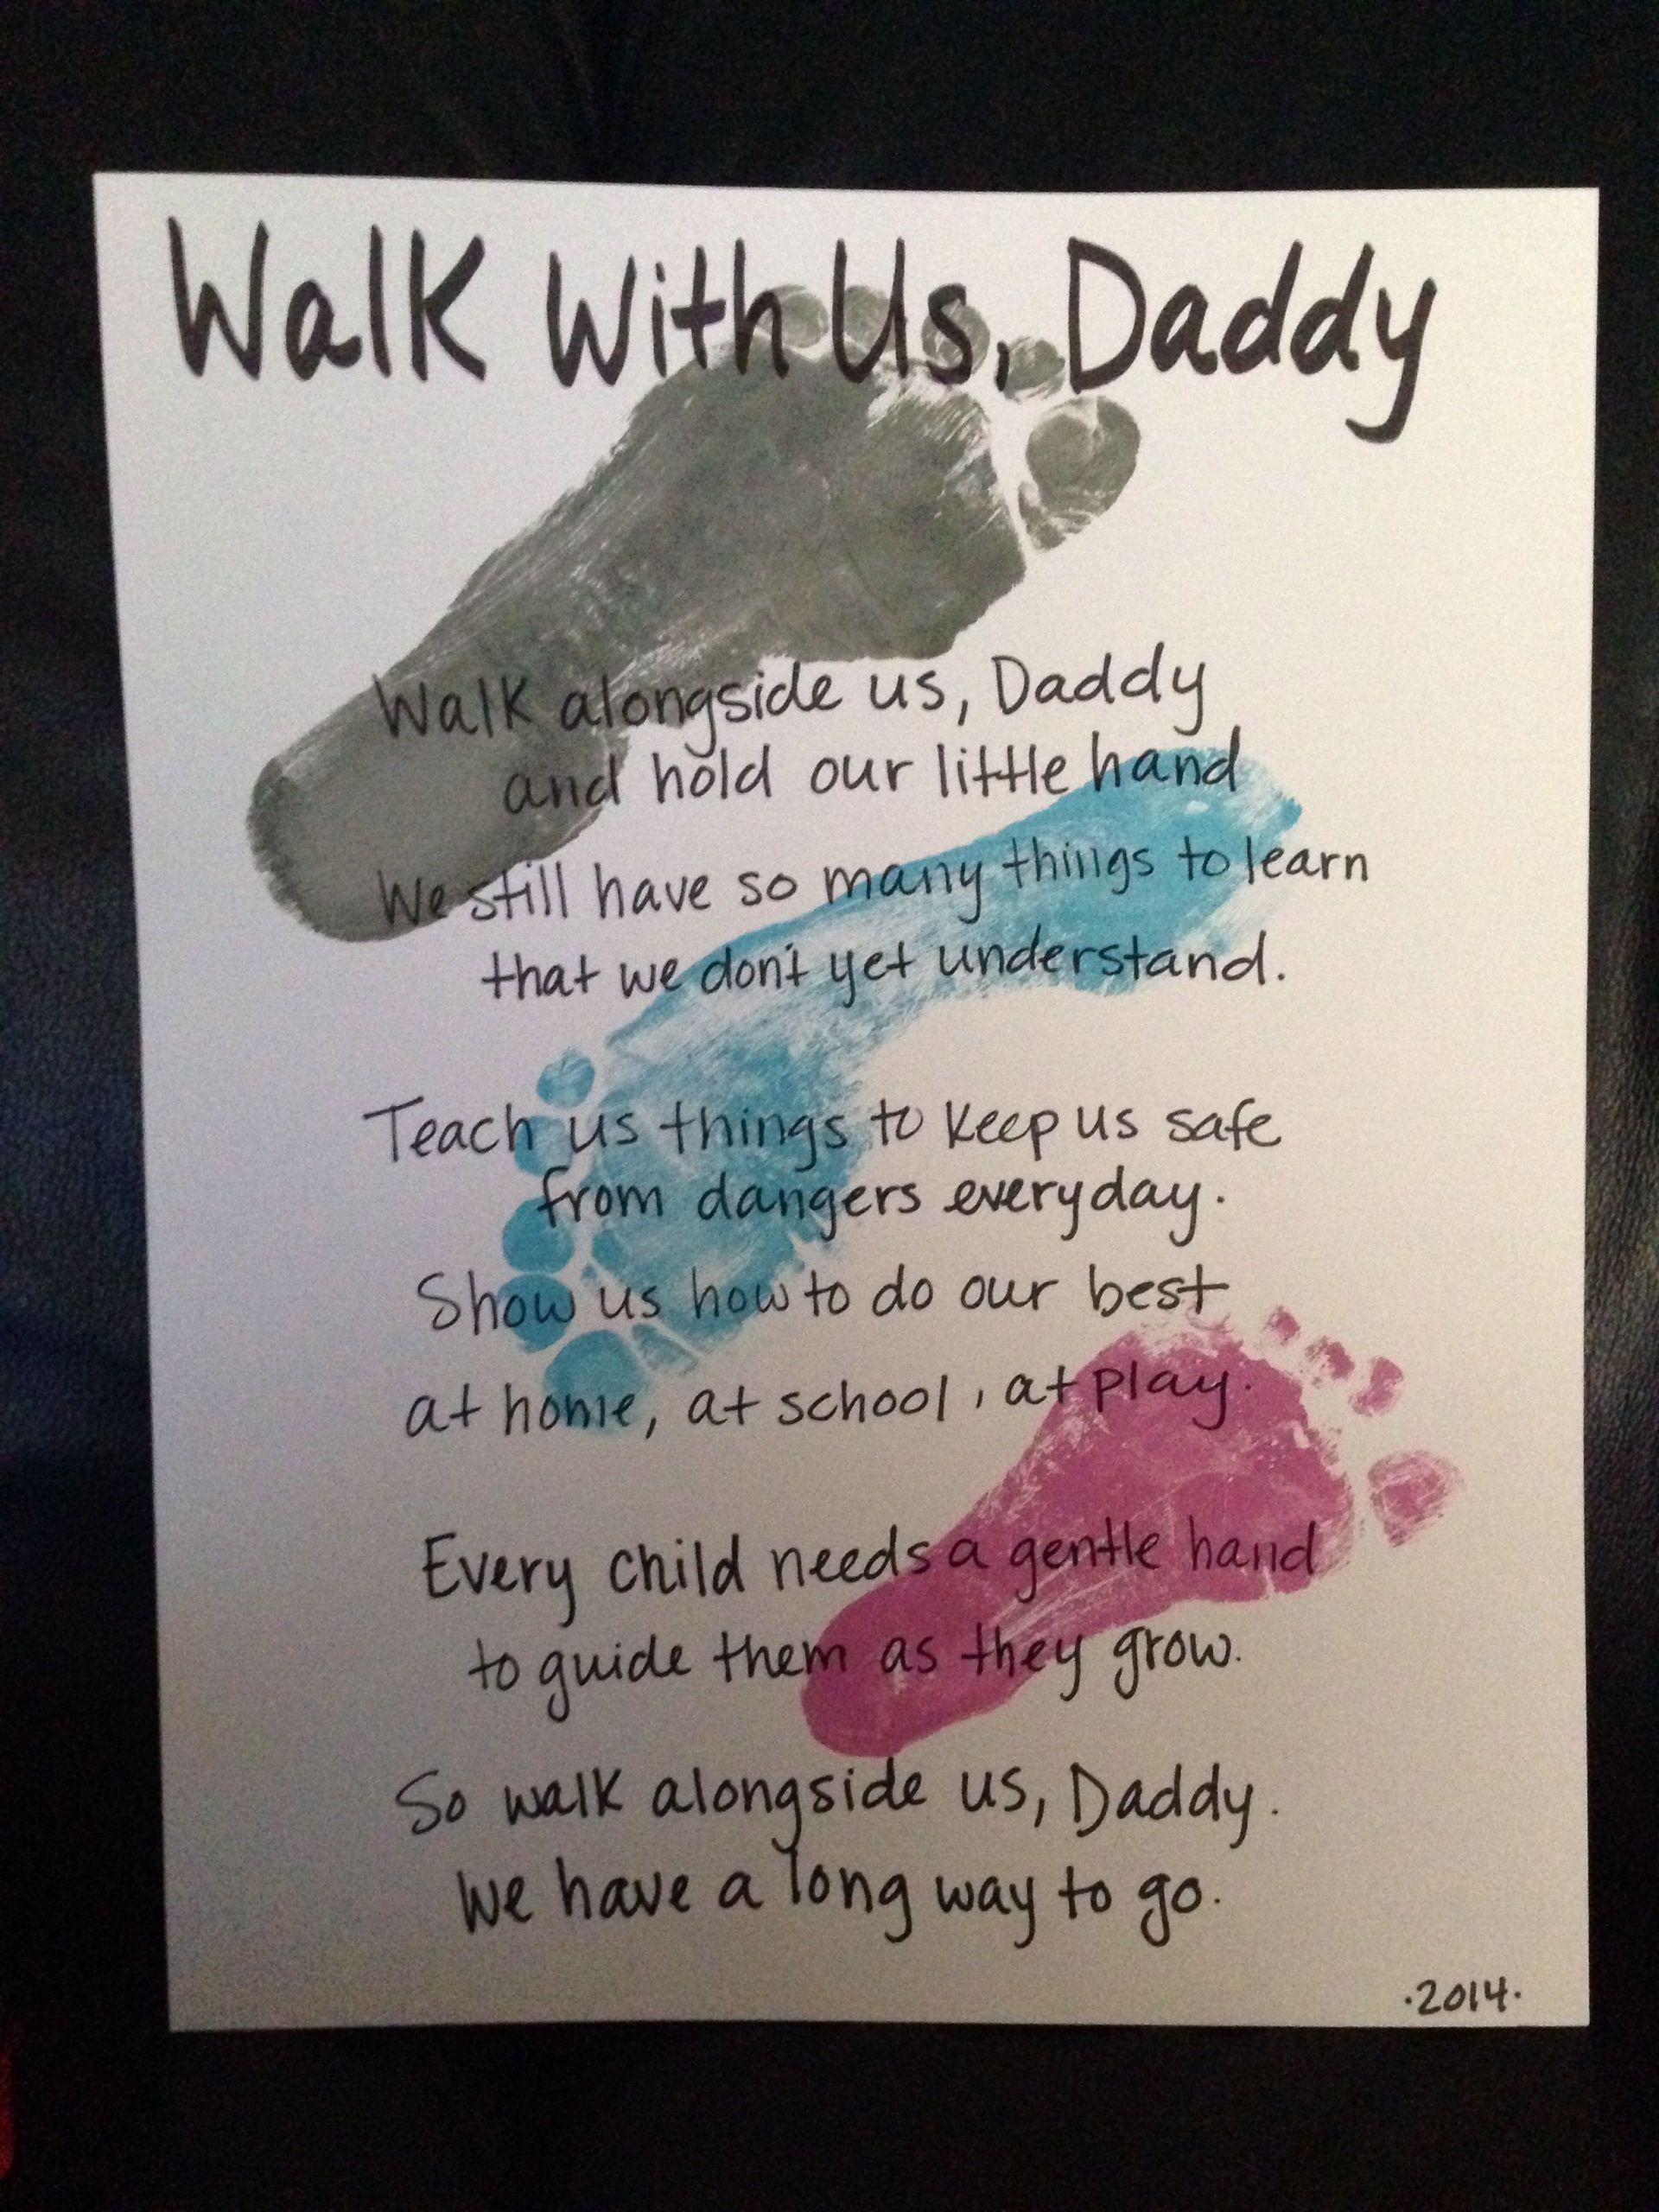 Daddy Daughter Fathers Day Gifts
 DIY Father s Day t idea My three daughters footprints